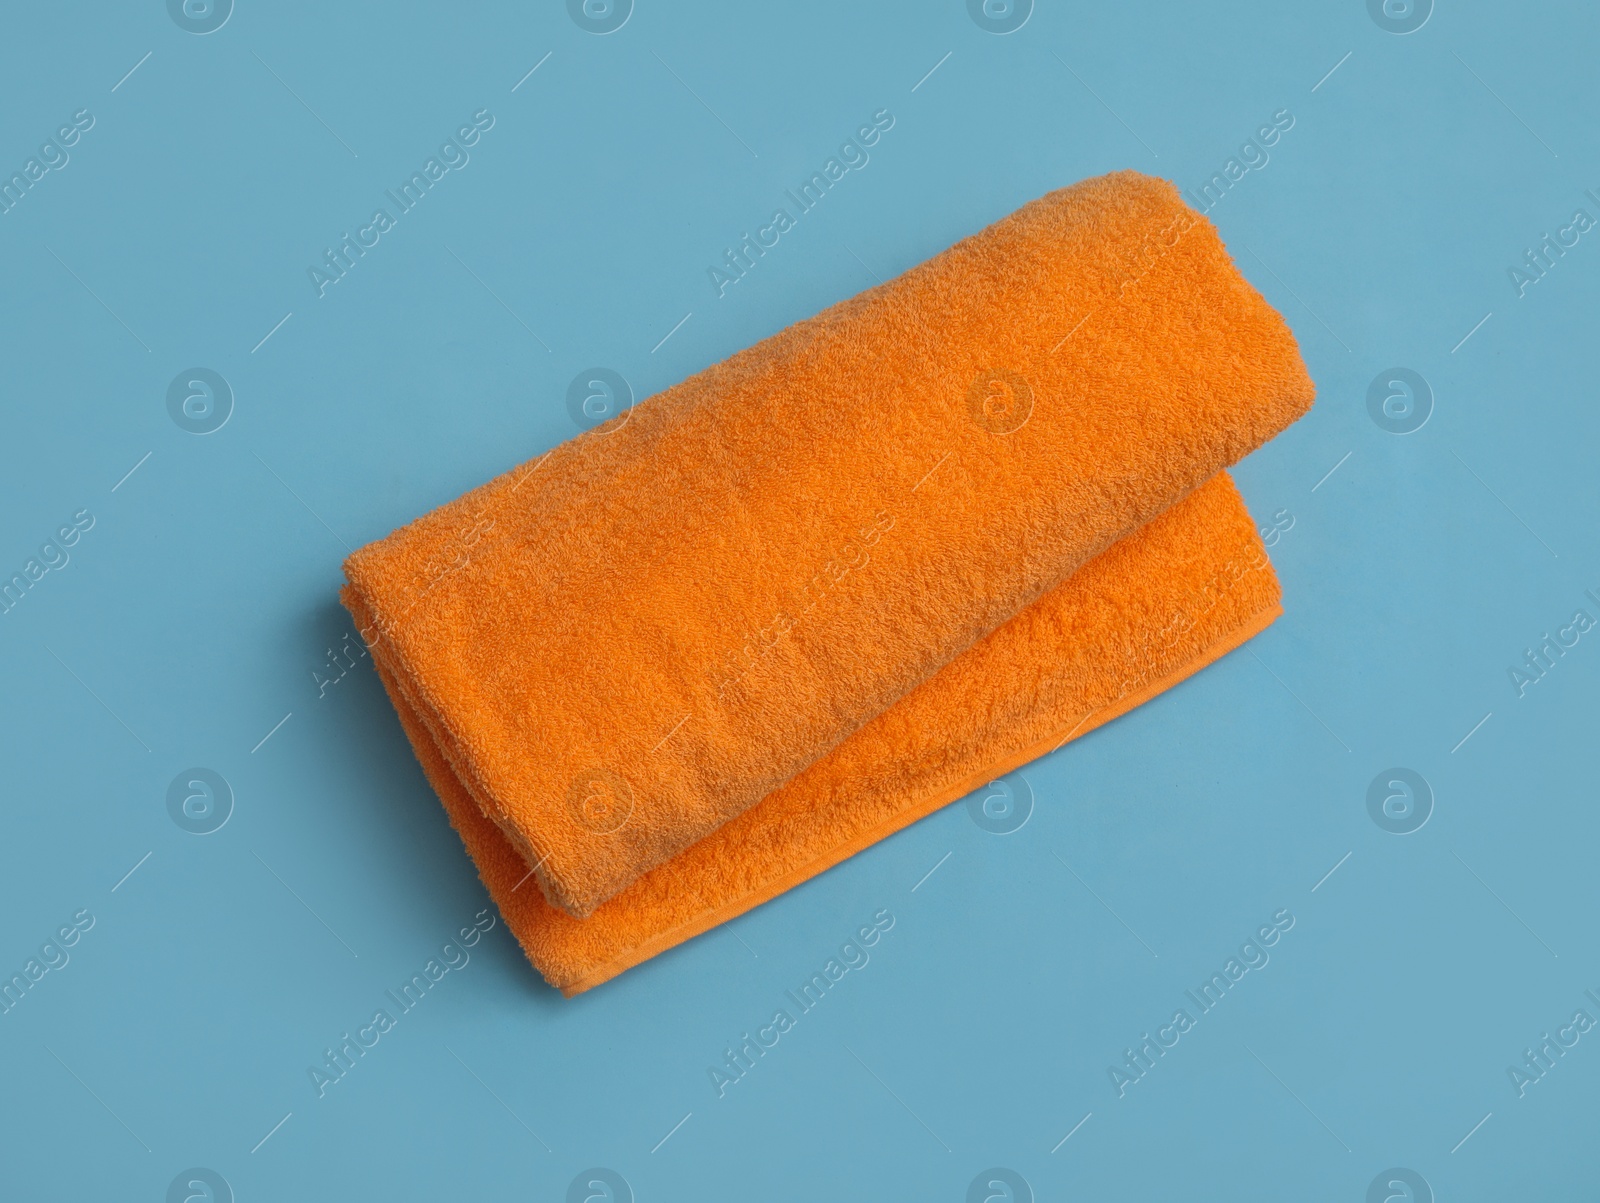 Photo of Rolled orange beach towel on light blue background, top view